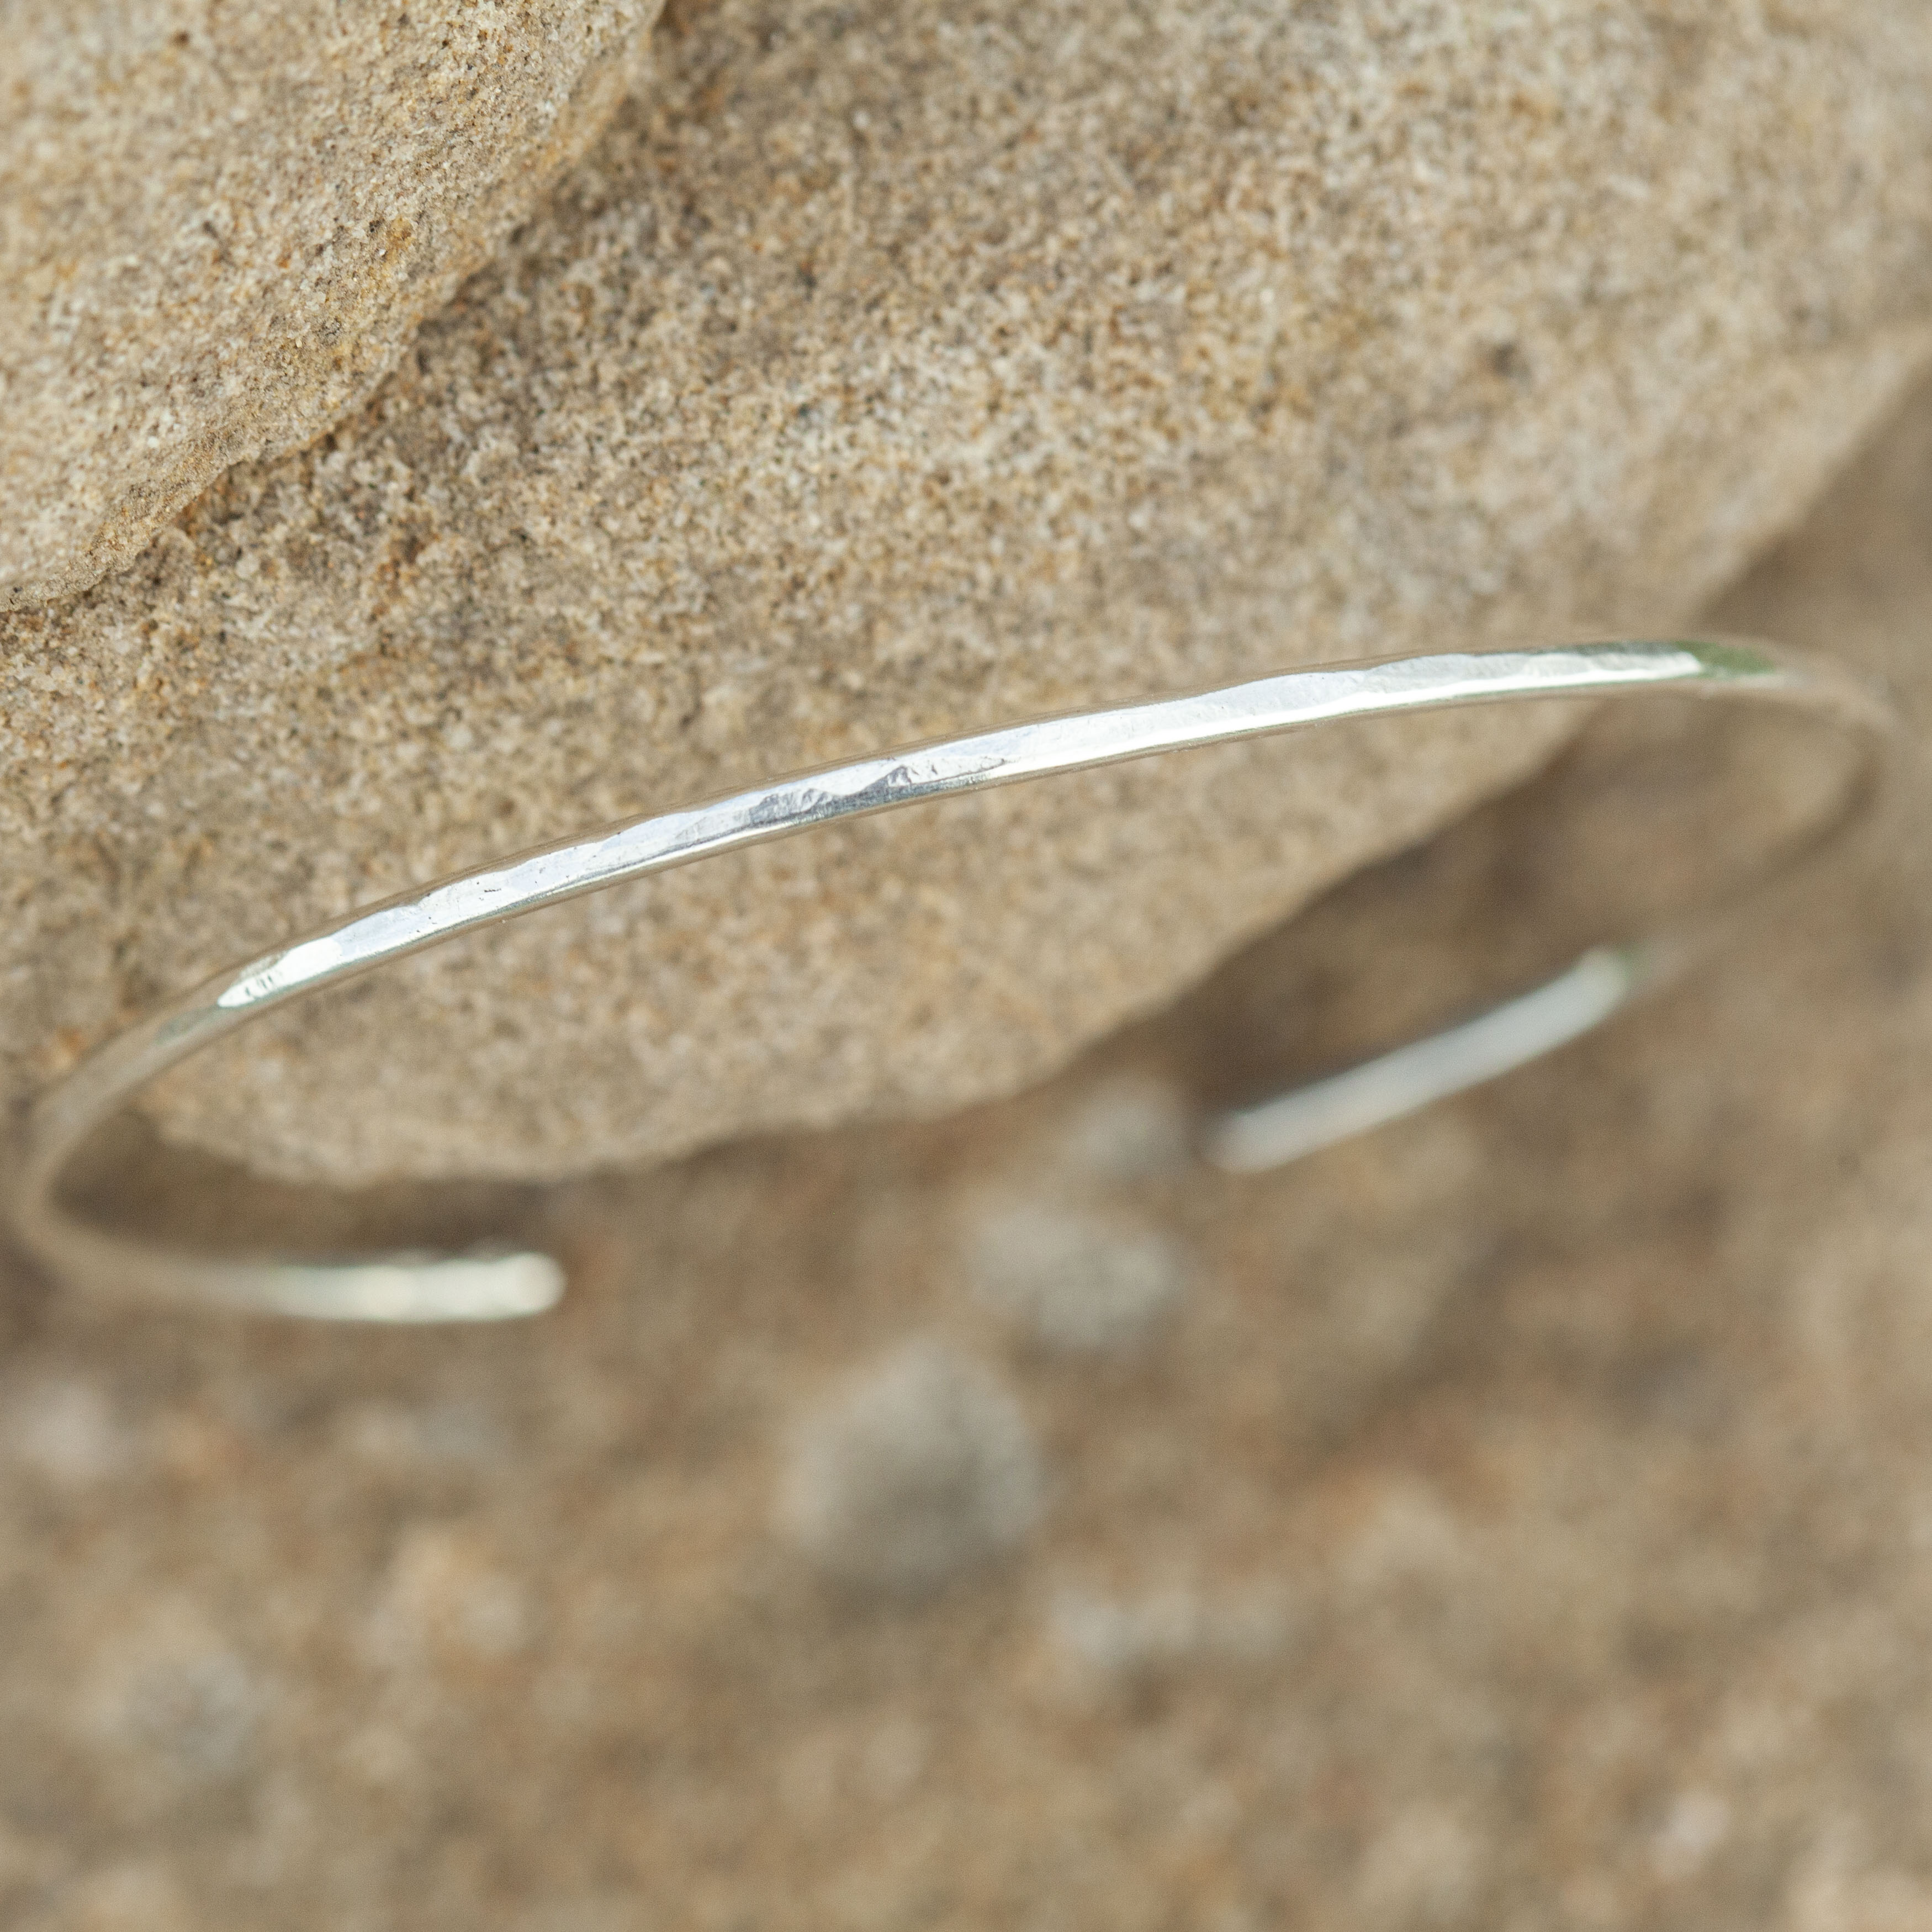 OOAK Simple thin hammered bracelet in silver #3 • size 6,5cm (ready-to-ship)